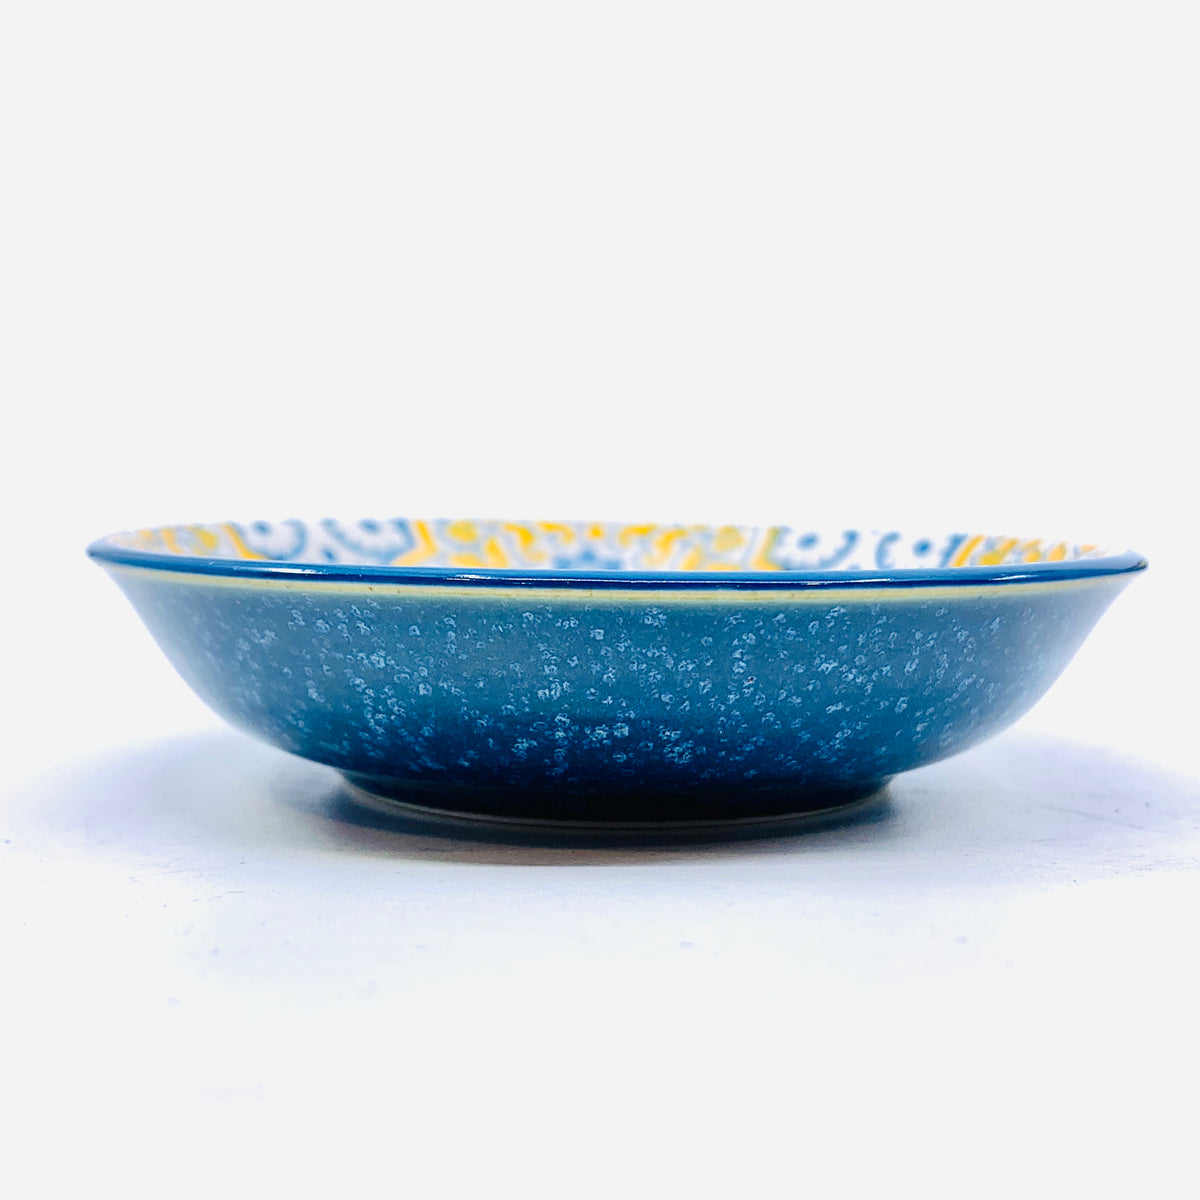 Patterned Porcelain Dipping Bowl 2, Yellow